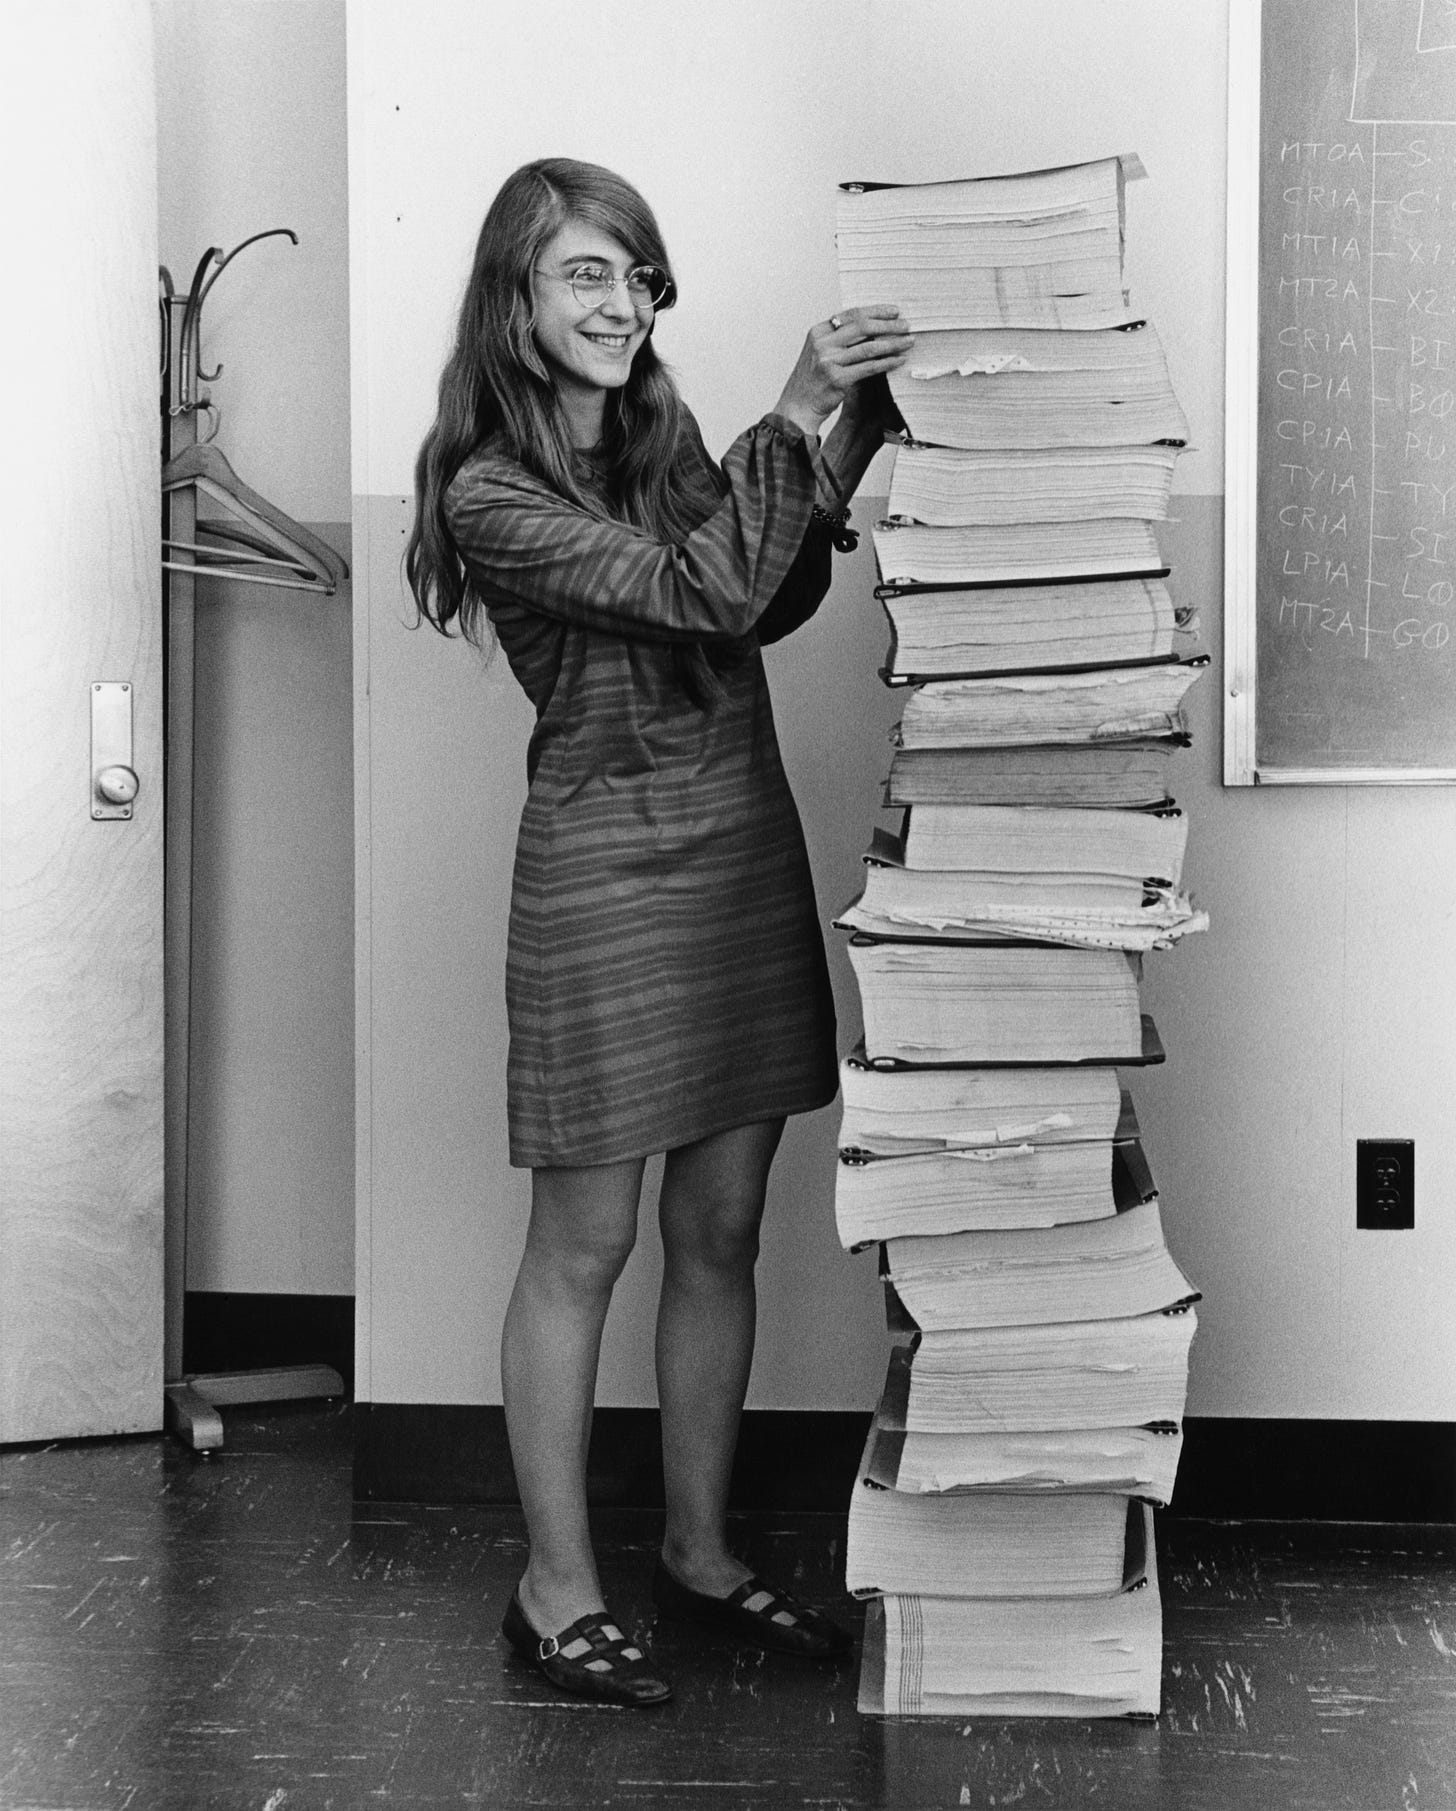 Margaret Hamilton standing next to the navigation software that she and her MIT team produced for the Apollo Project, which is an enormous stack of pages going from the floor up to her head.